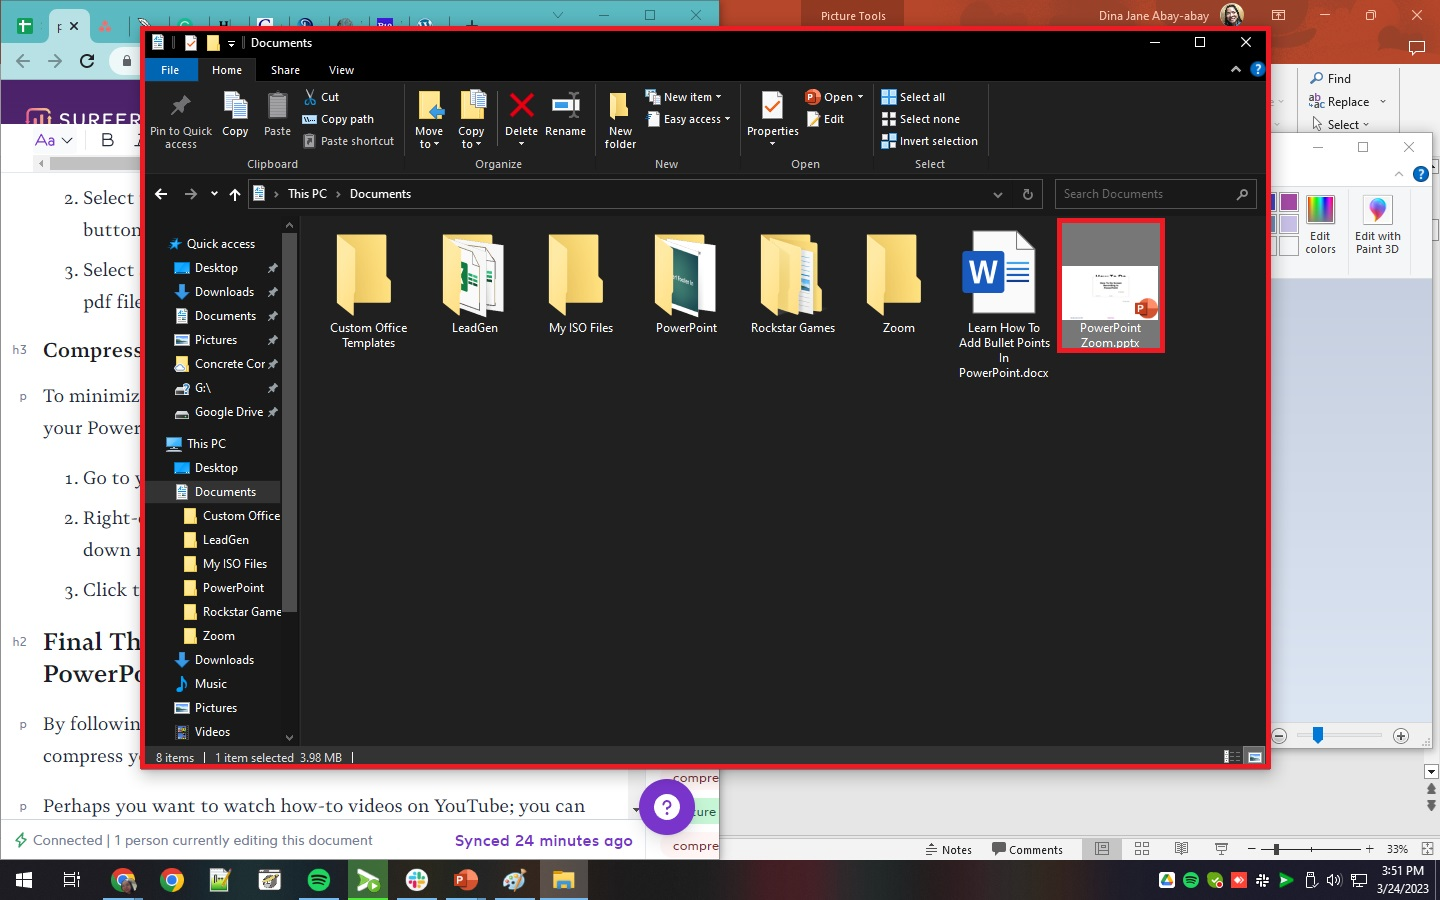 in your file explorer, select the PPT file.